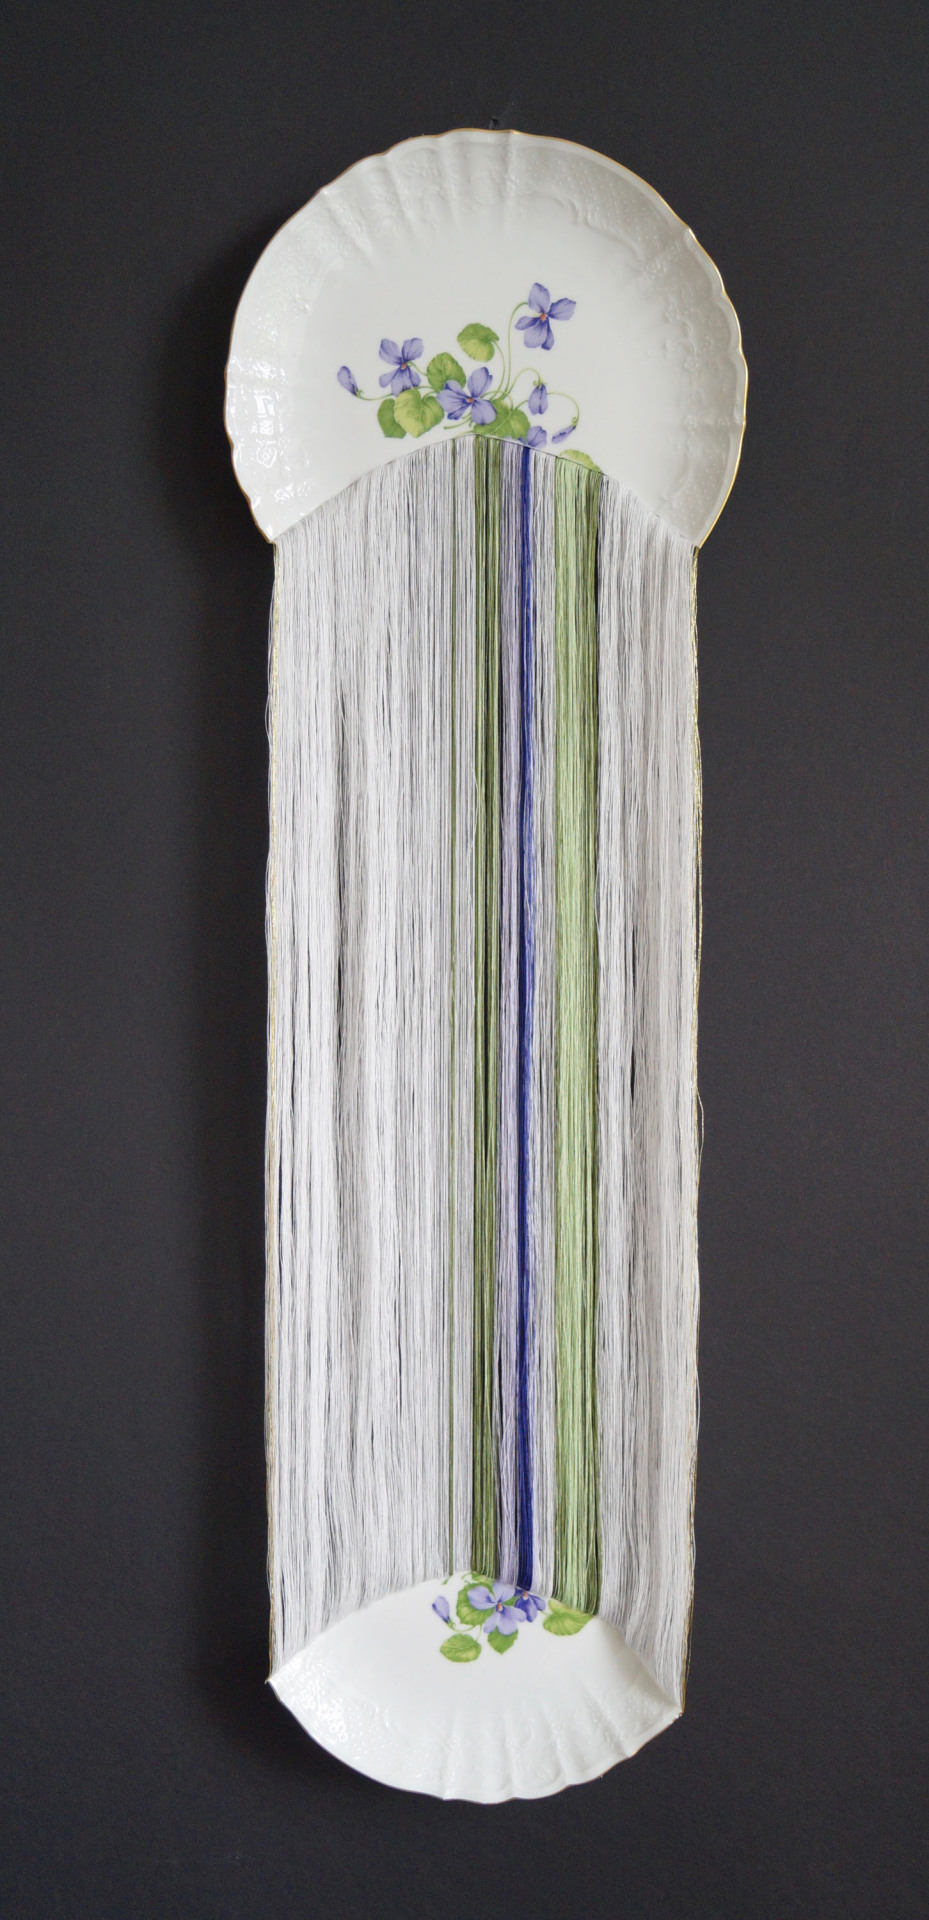 Porcelain And Threads, Intriguing Contemporary Sculptures By Helena Hafemann (8)